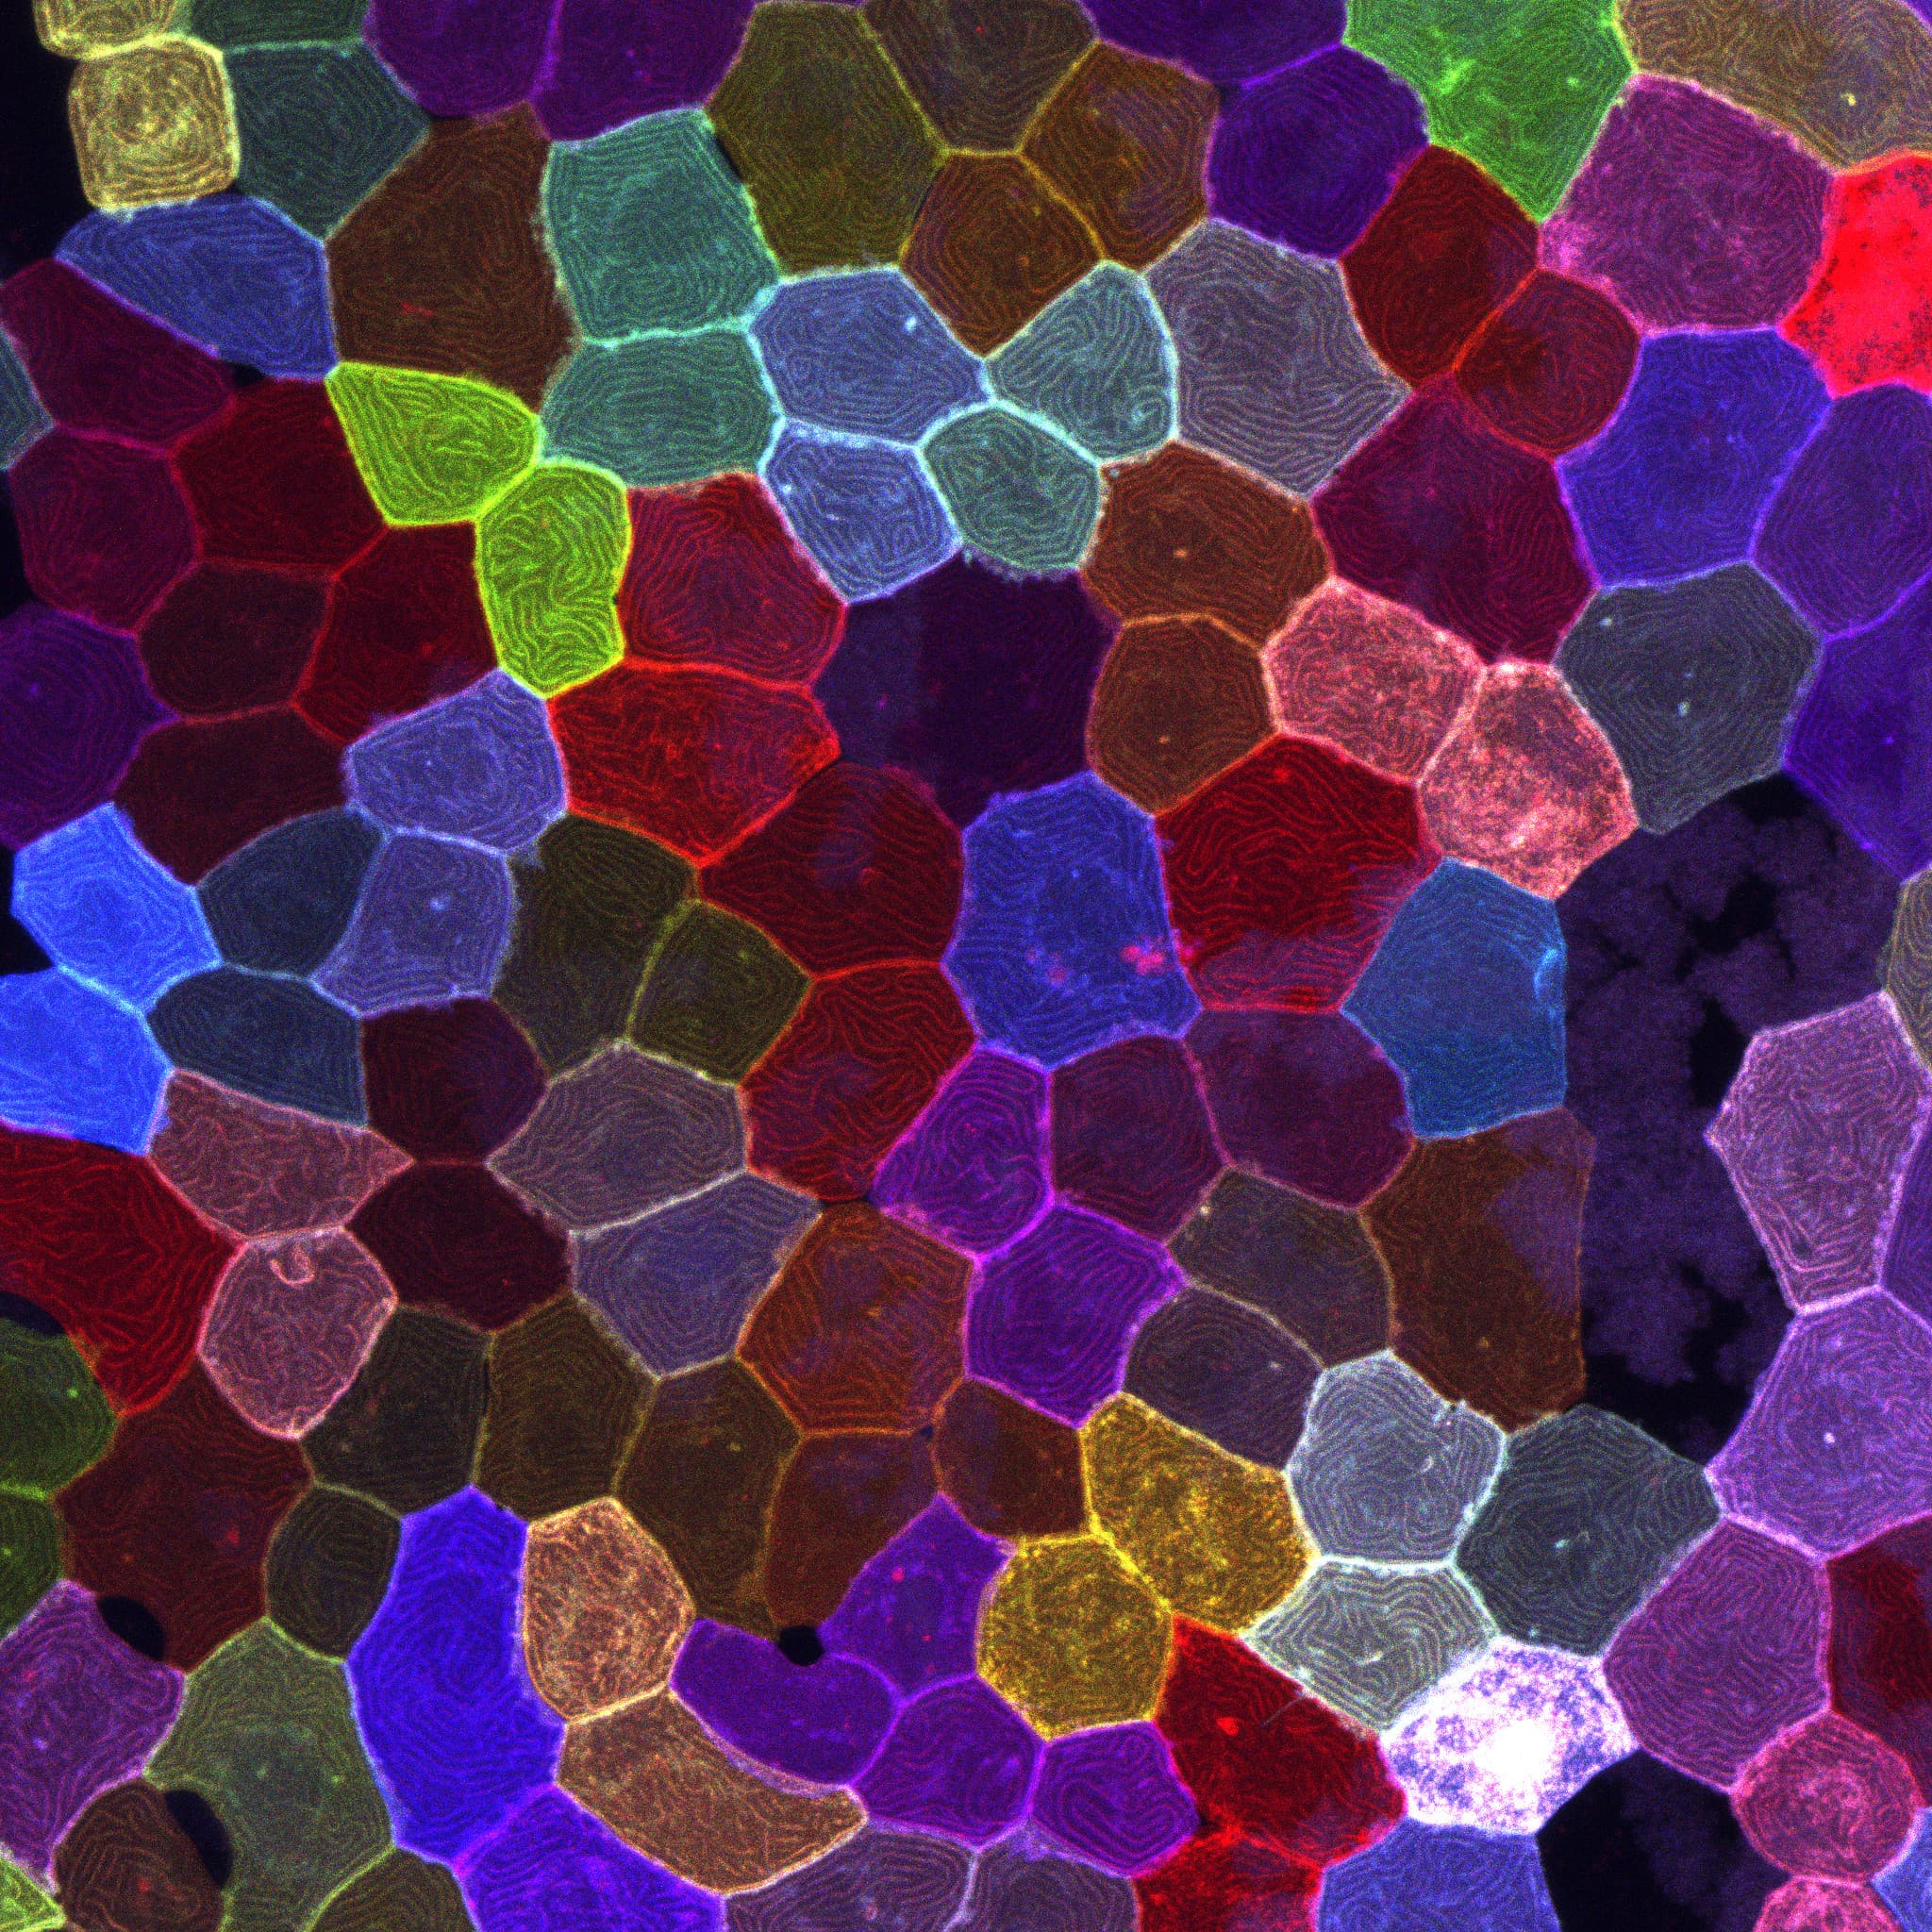 Zebrafish Skin Cells (B)/Keat Ying Chan/ Institute of Cellular and Organismic Biology, Academia Sinica